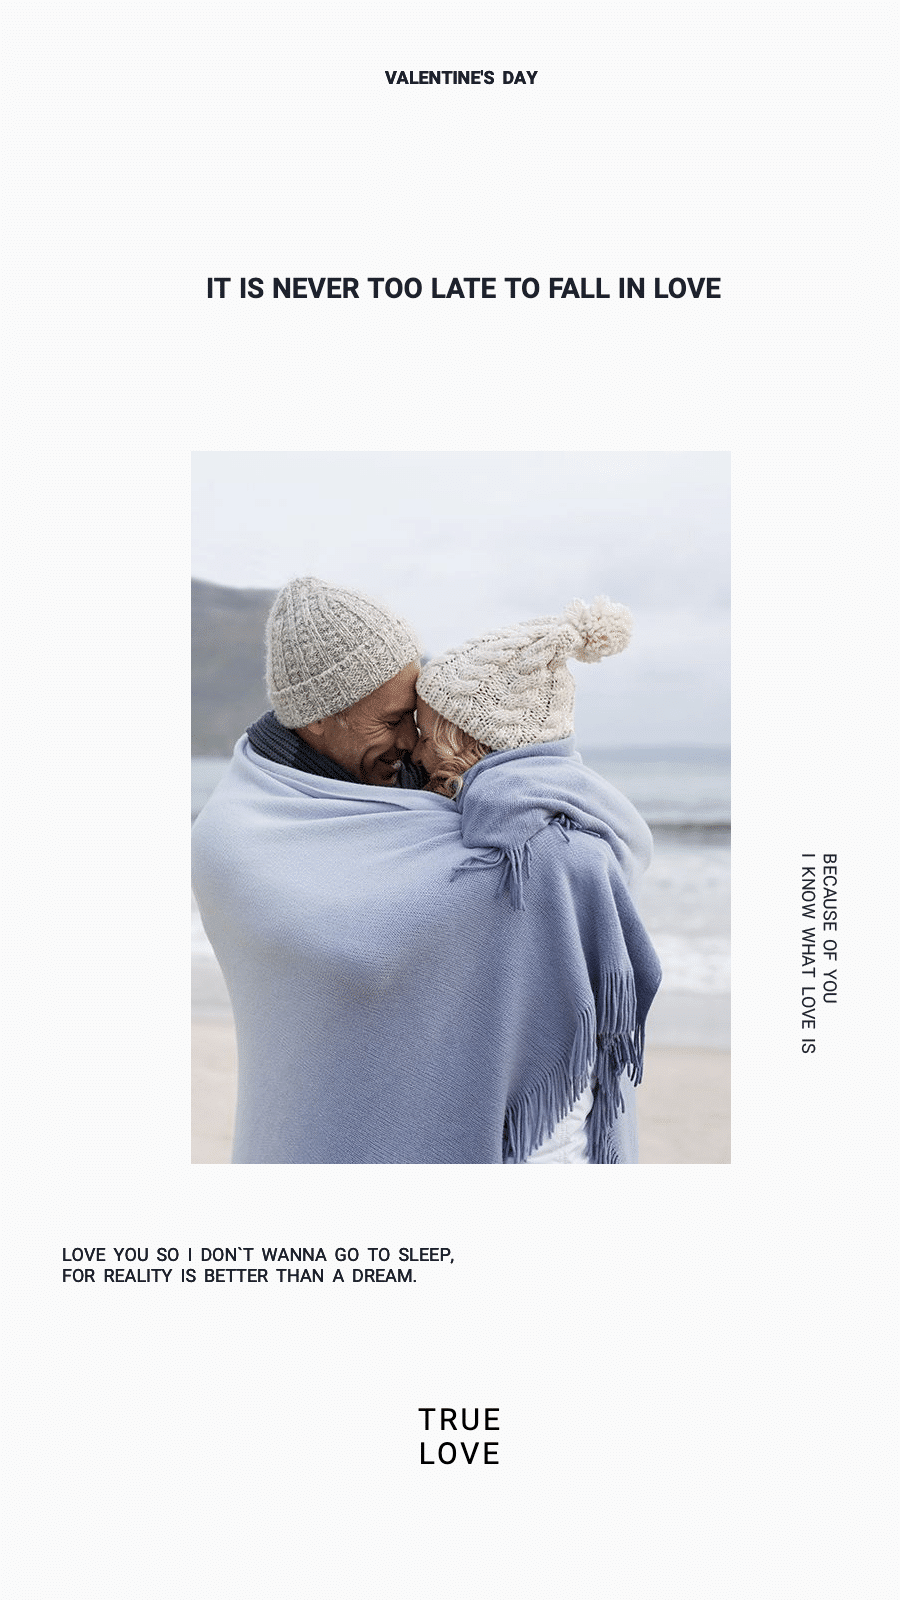 Valentine's Day Couple Photo Show Romantic Art Simple Fashion Style Poster Instagram Story预览效果